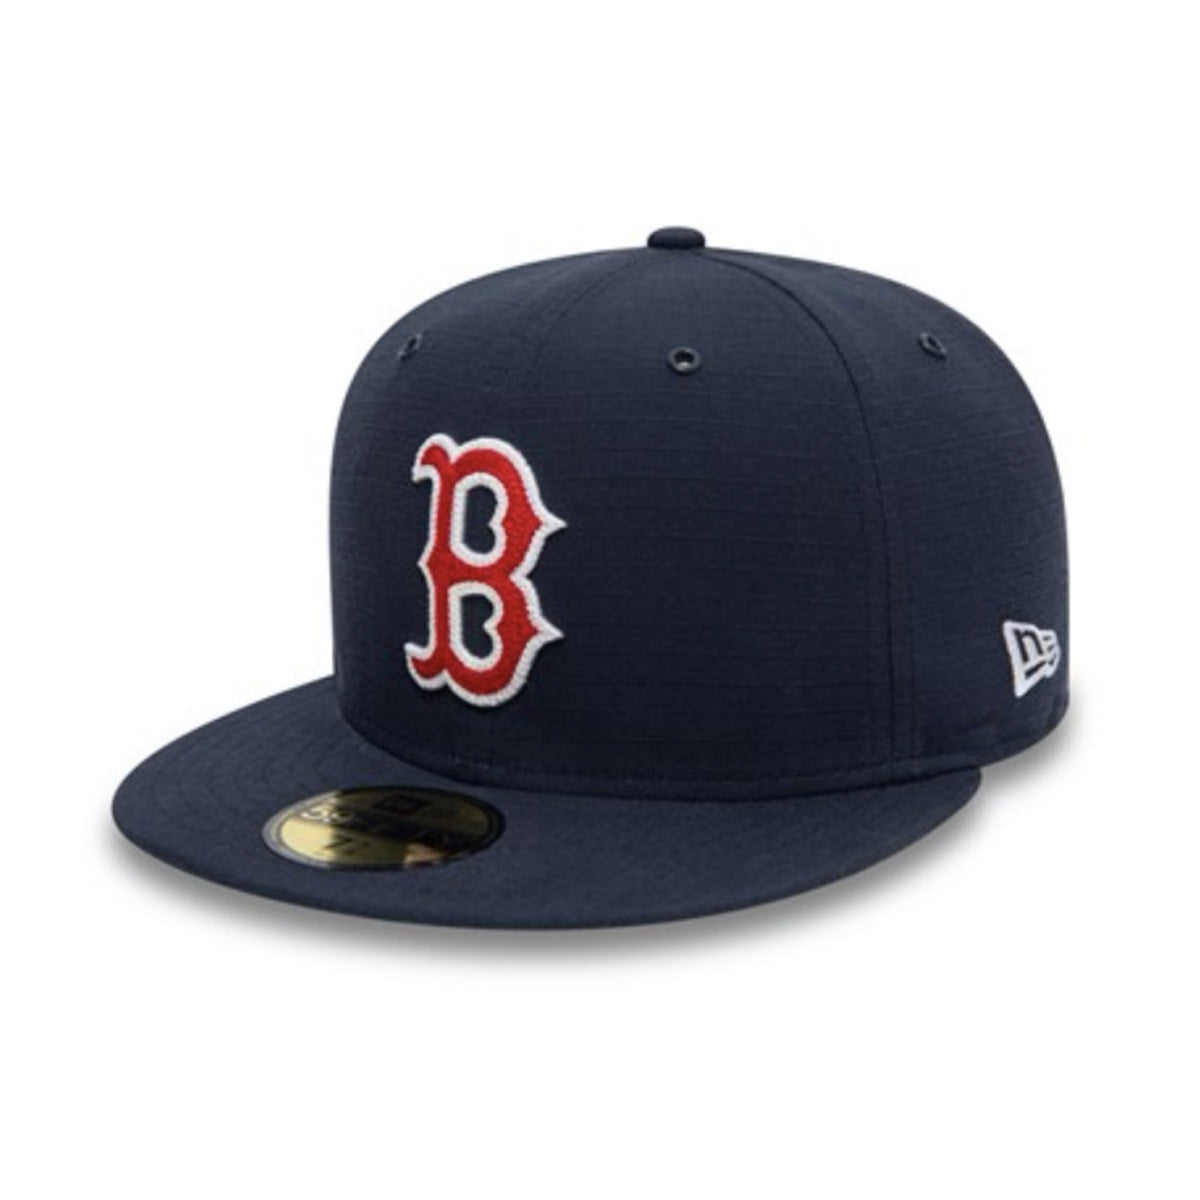 New Era Boston Red Sox 59Fifty Authentic On Field Game Cap